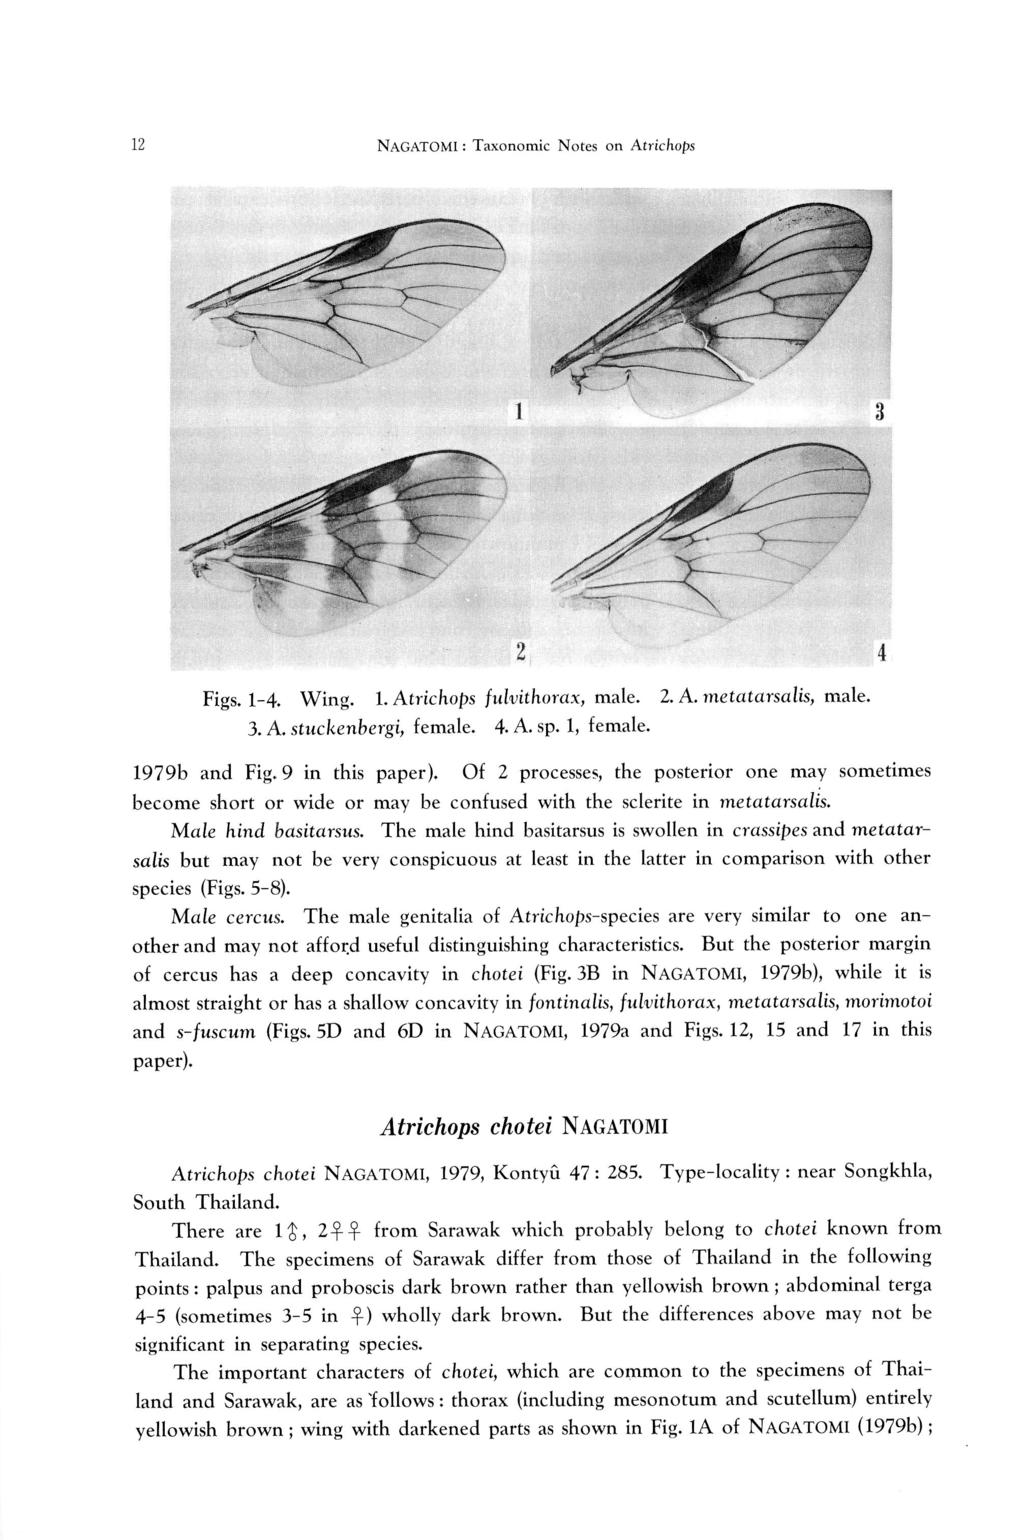 12 NAGATOMI: Taxonomic Notes on Atrichops ' ~~'i%. 2. 4 Figs. 1-4. Wing. 1. Atrichops fulvithorax, male. 2. A. metatarsalis, male. 3. A. stuckenbergi, female. 4. A. sp. 1, female. 1979b and Fig.